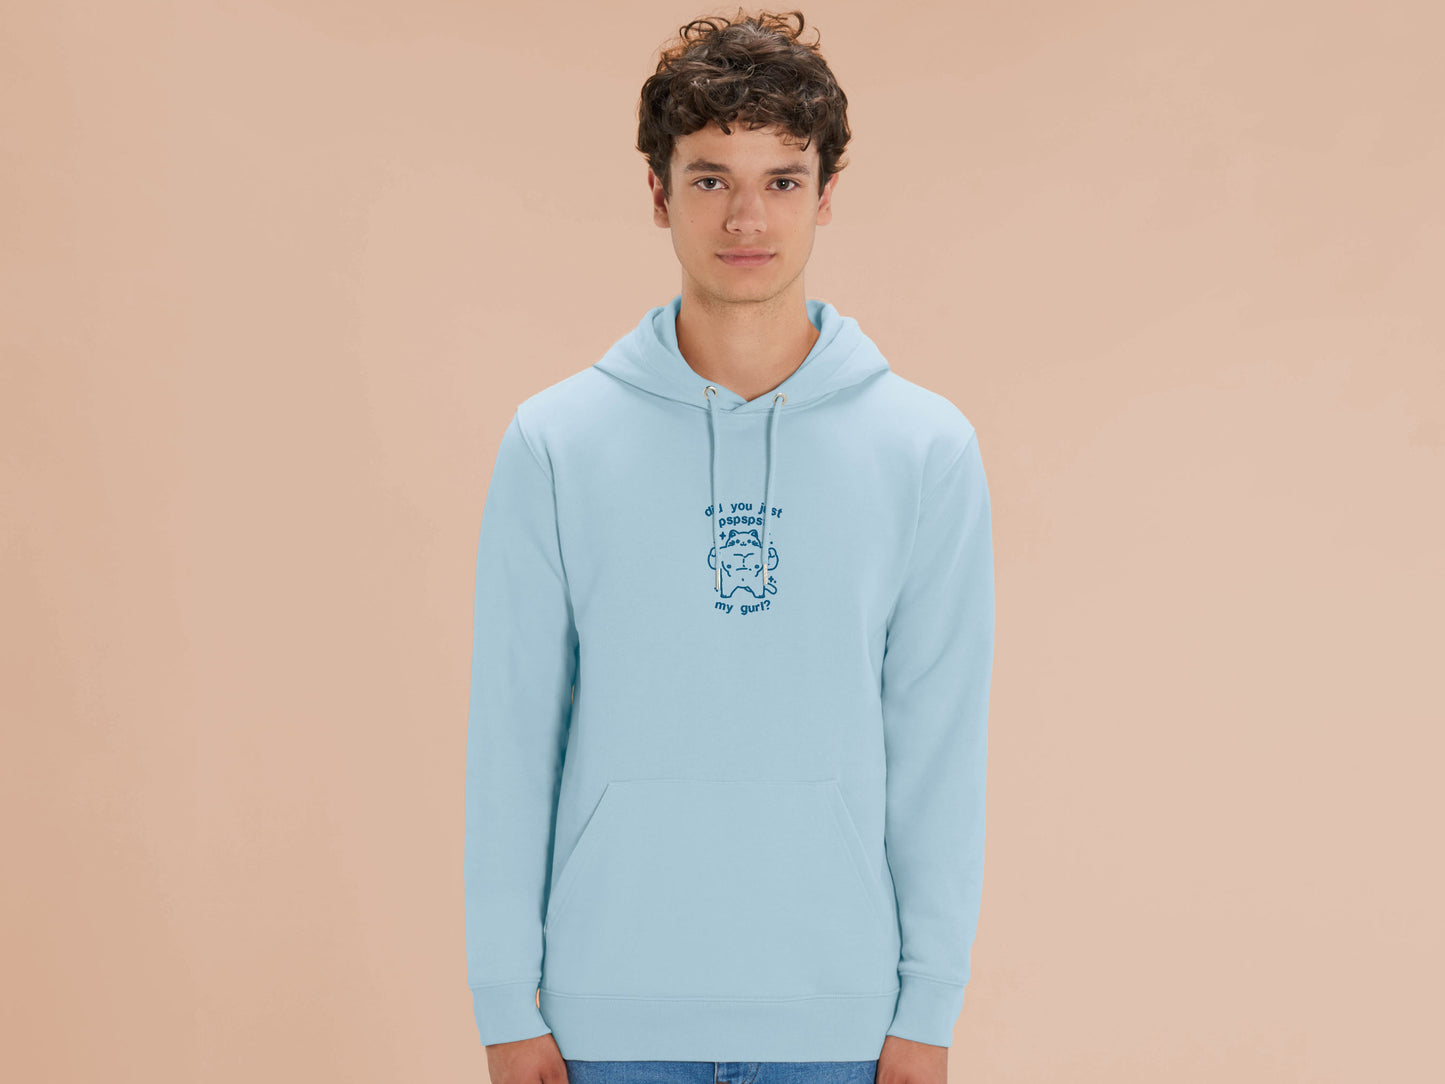 A man wearing a long sleeved blue fleece hoodie with a blue embroidered design with a cute muscular chibi cat design and the text did you just pspspst my gurl?